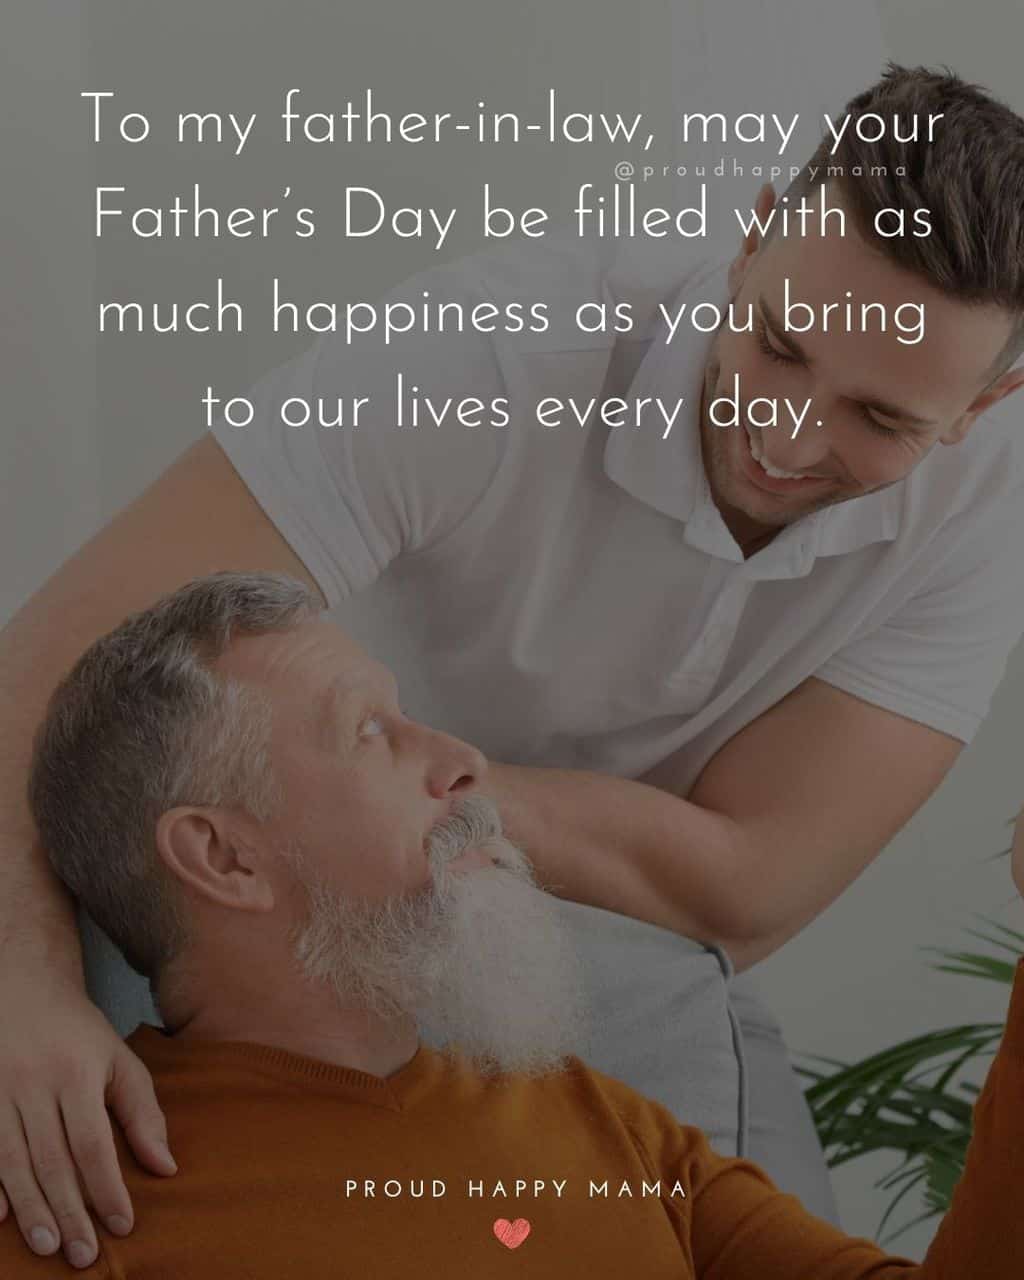 Happy Fathers Day Quotes For Father In Law - To my father in law, may your Father’s Day be filled with as much happiness as